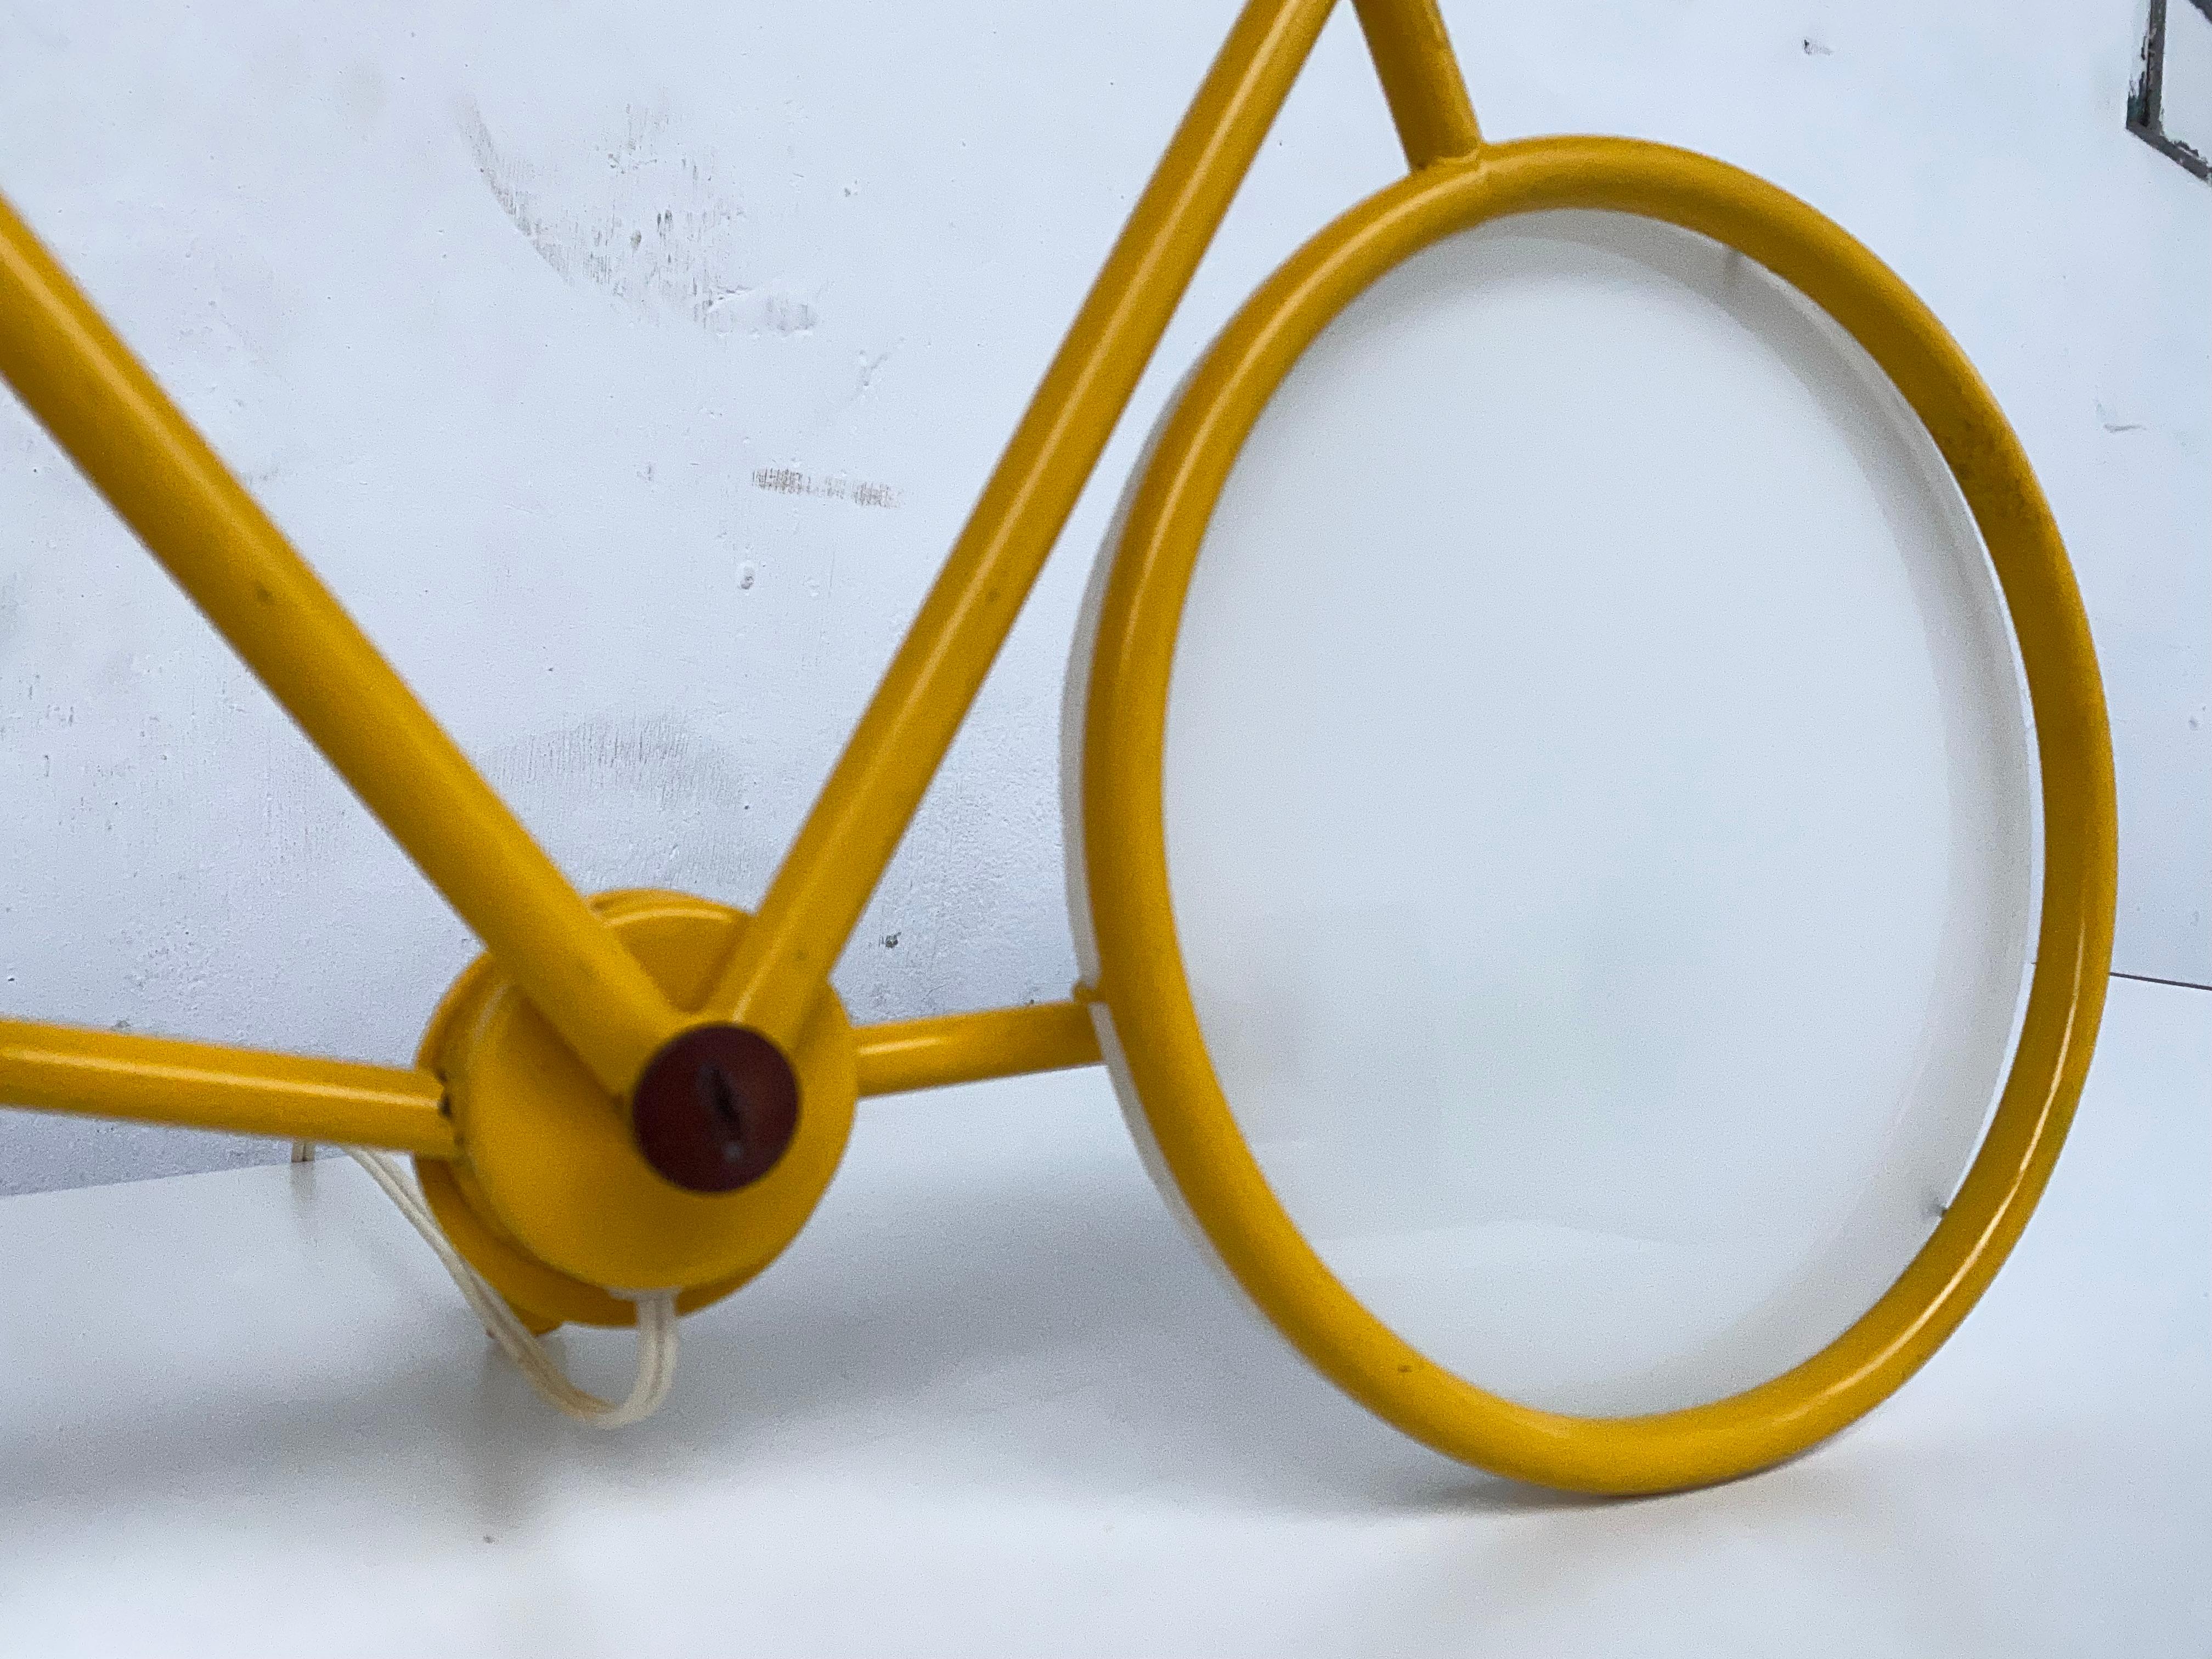 Enameled Yellow Pop Art Racing Bicycle Wall or Table Lamp by Zicoli, Italy, 1970's For Sale